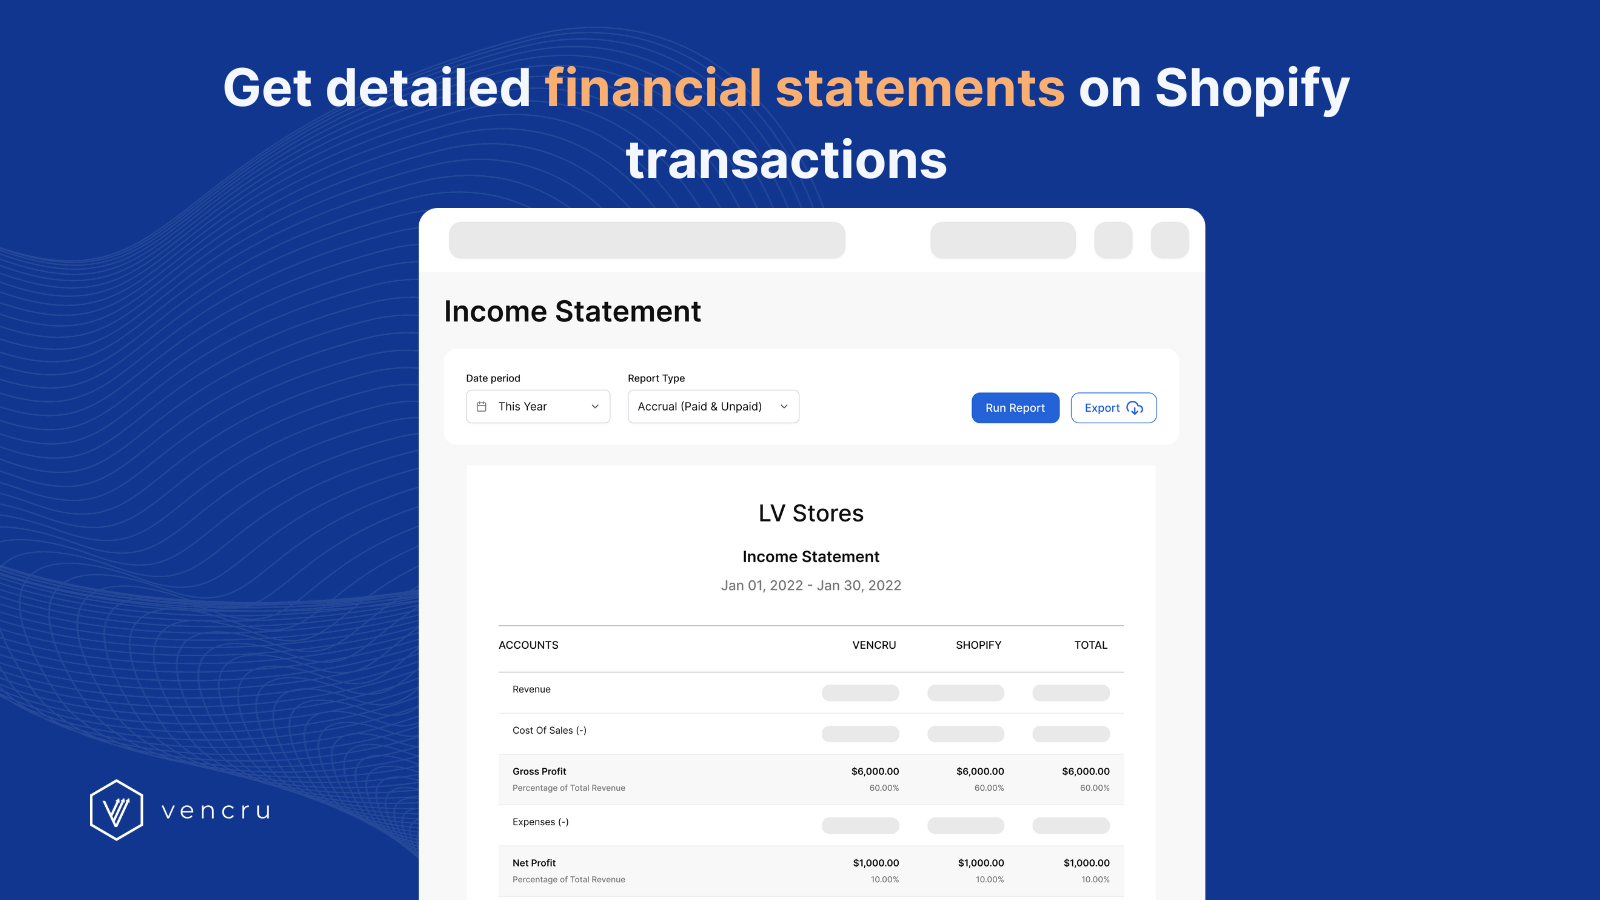 Get detailed financial statements on Shopify transactions